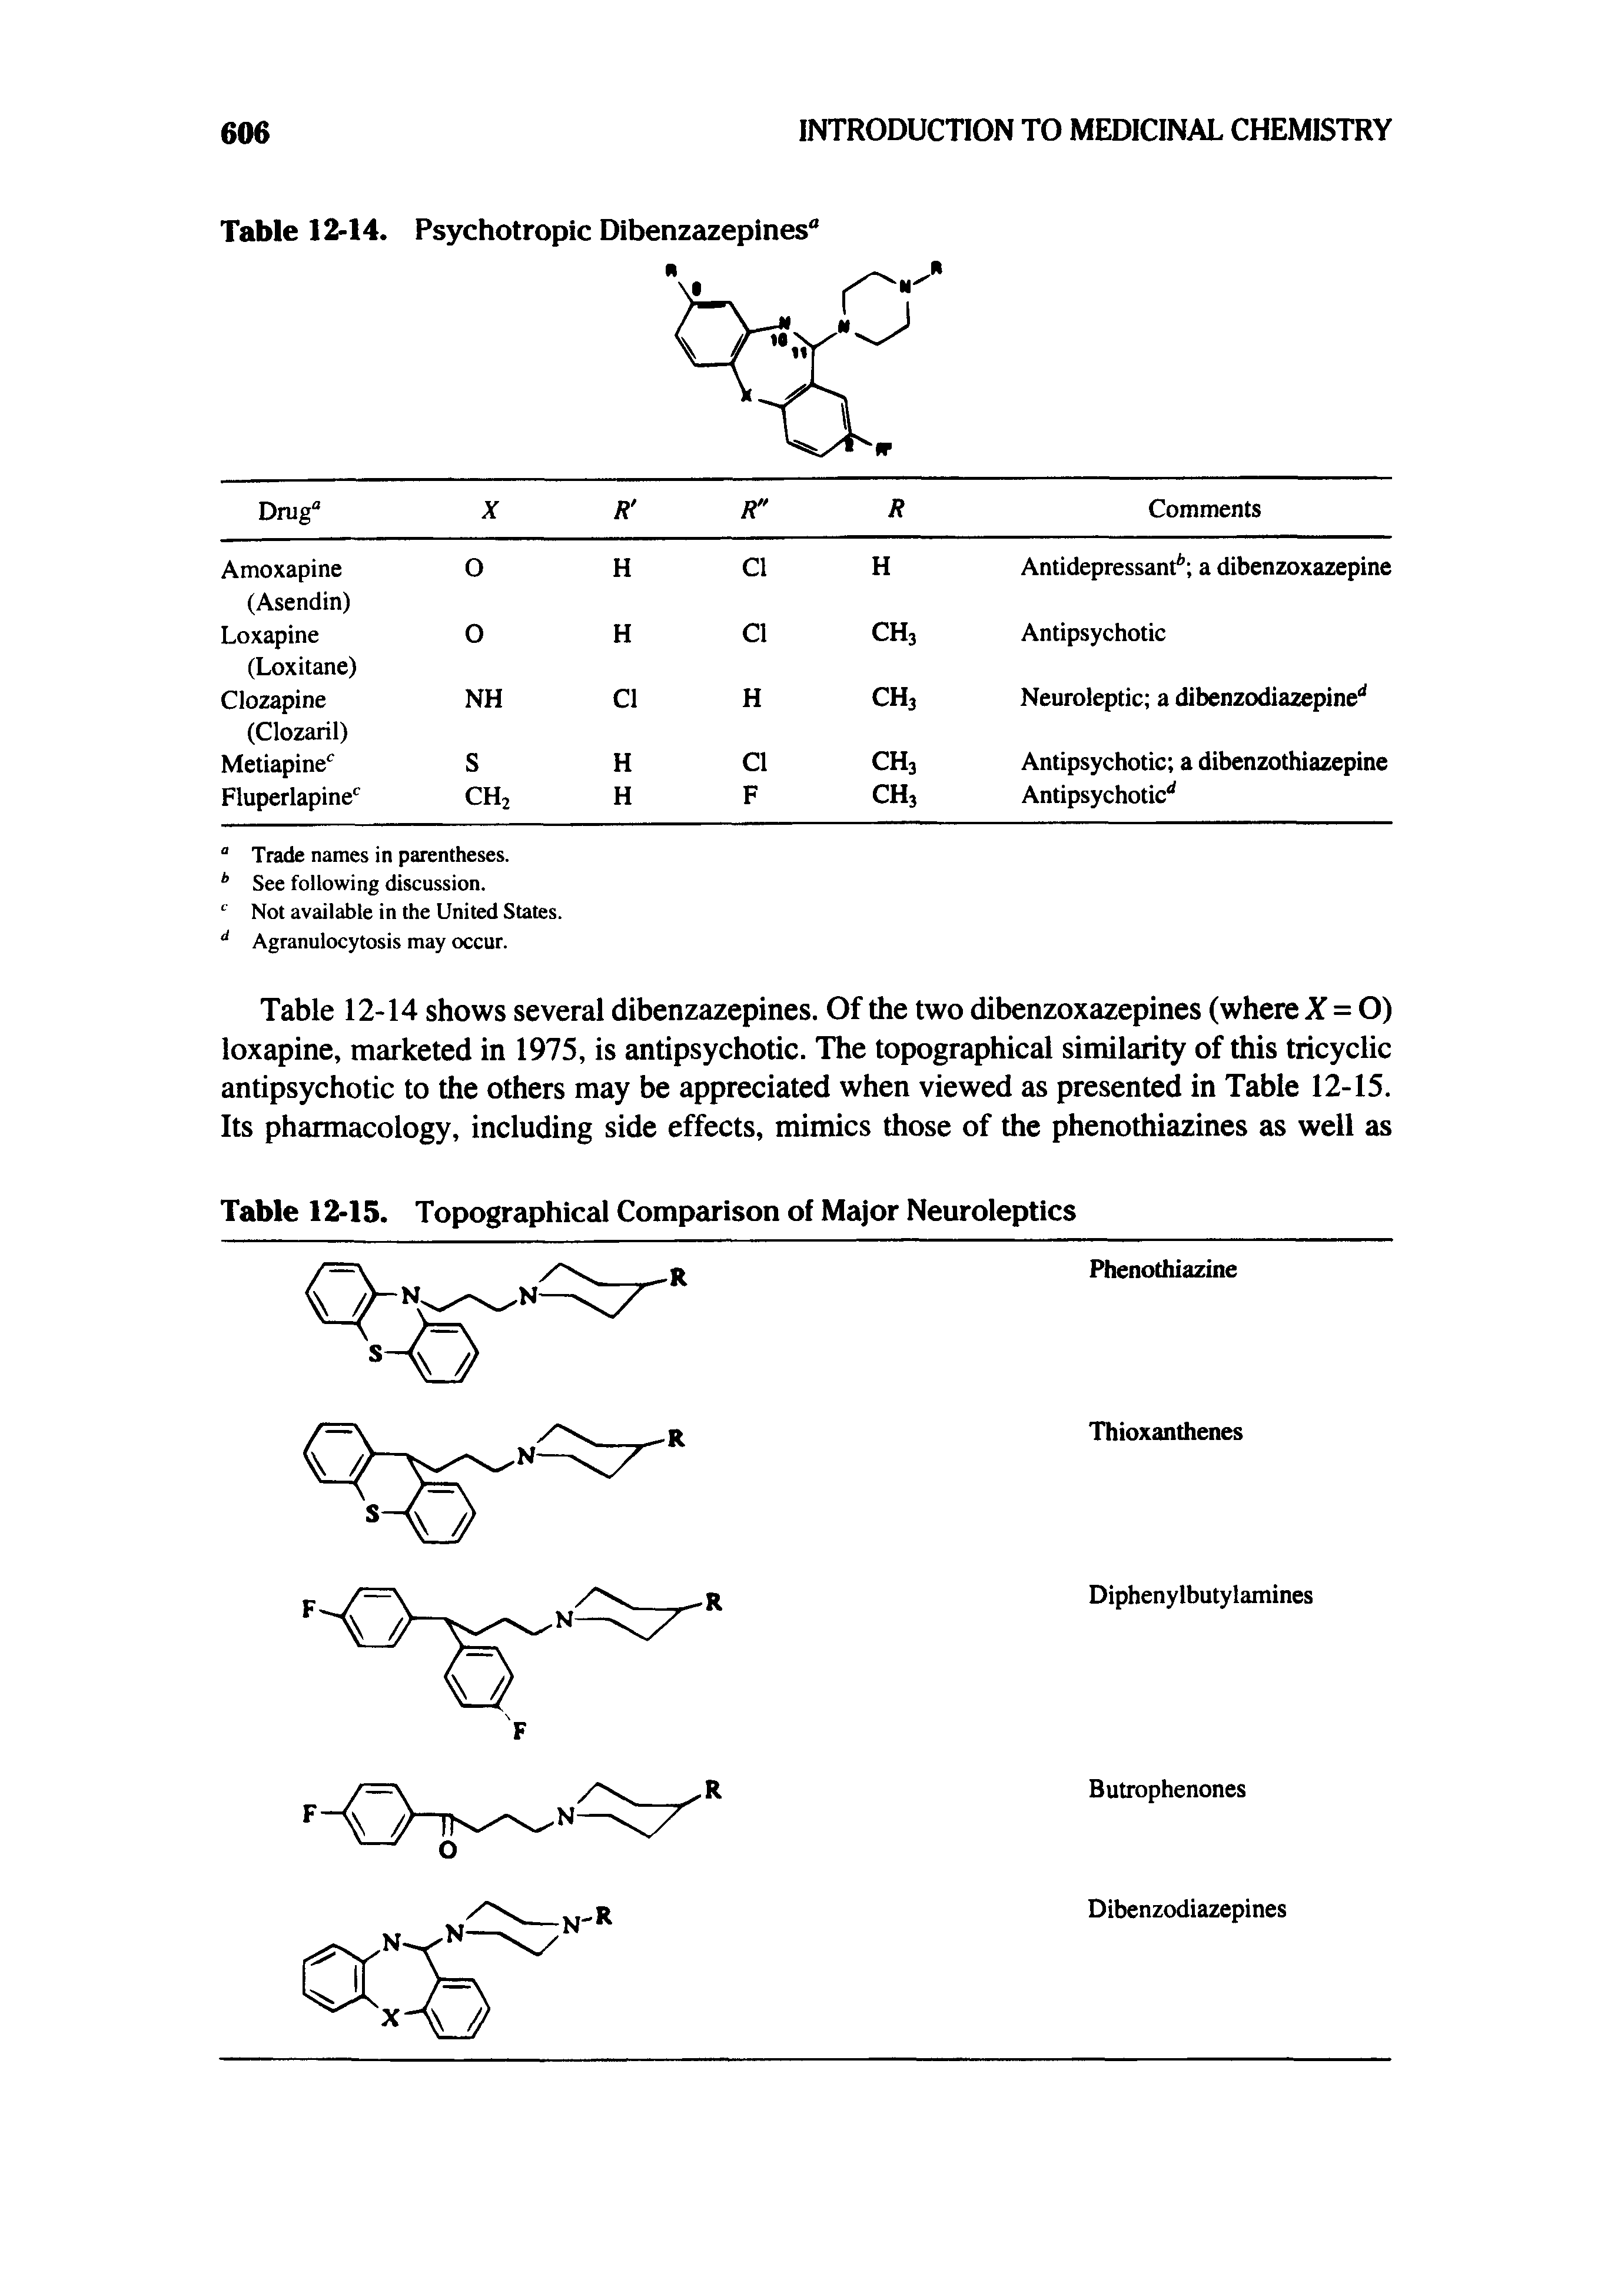 Table 12-14 shows several dibenzazepines. Of the two dibenzoxazepines (where X = O) loxapine, marketed in 1975, is antipsychotic. The topographical similarity of this tricyclic antipsychotic to the others may be appreciated when viewed as presented in Table 12-15. Its pharmacology, including side effects, mimics those of the phenothiazines as well as...